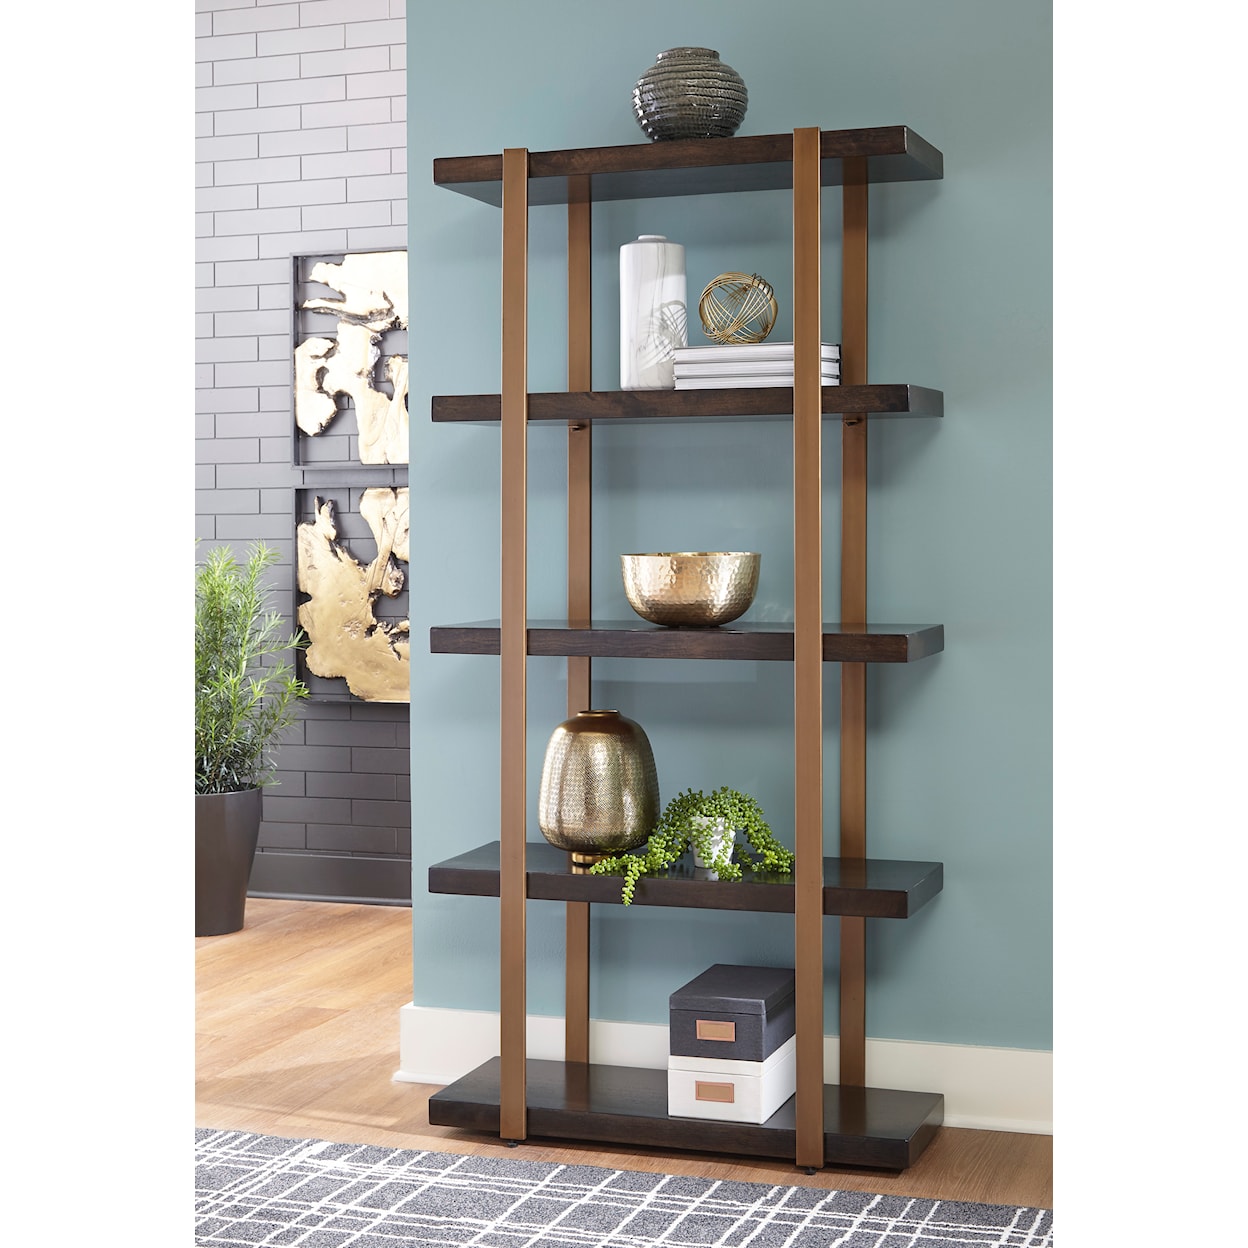 Signature Design by Ashley Beckville Bookcase